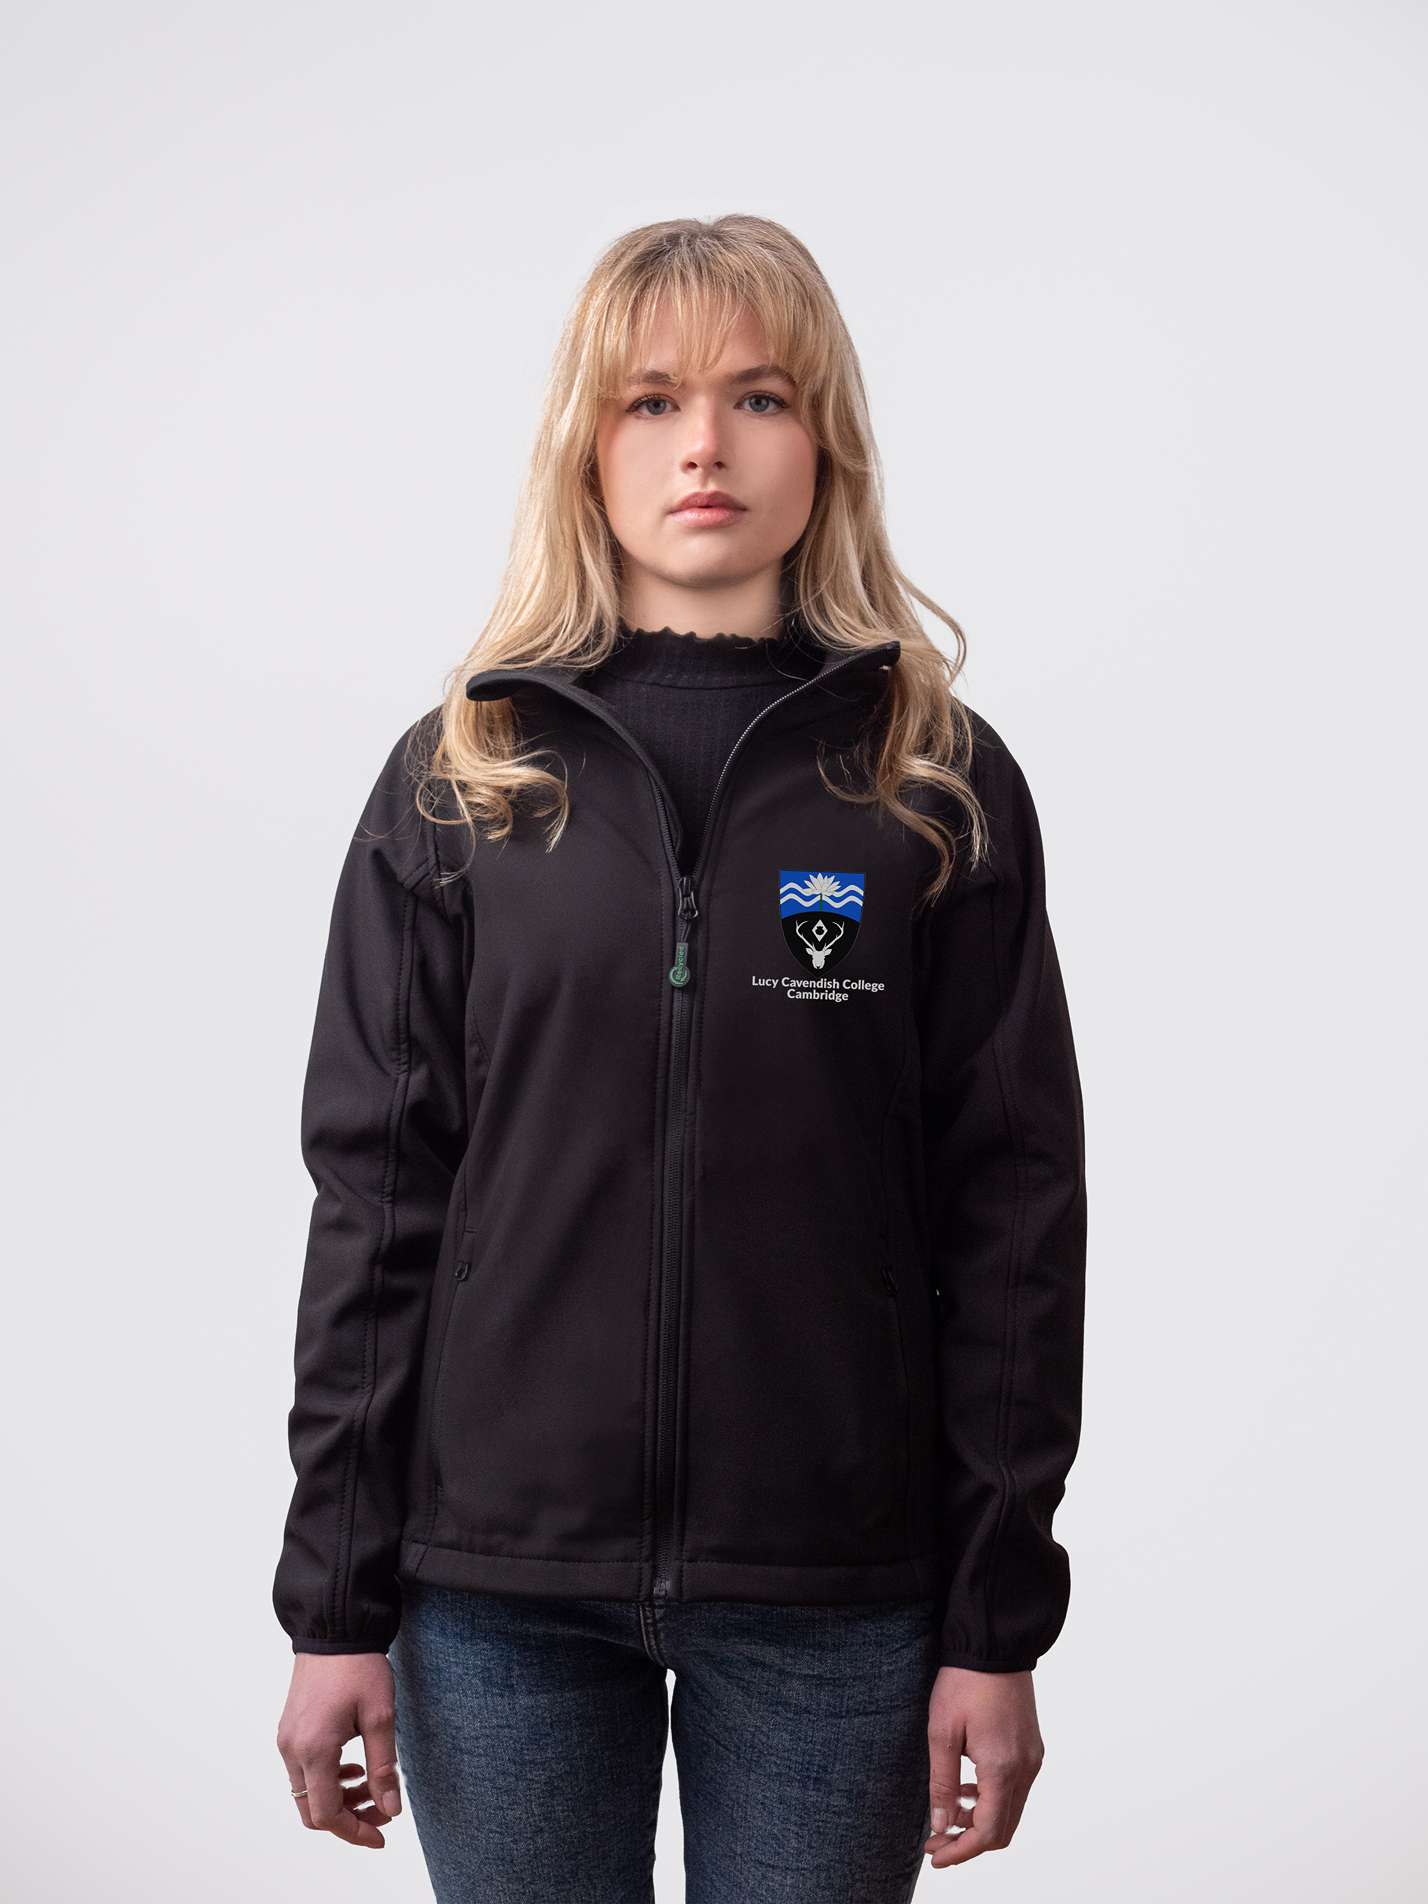 A student wearing a sustainable, Lucy Cavendish College embroidered jacket